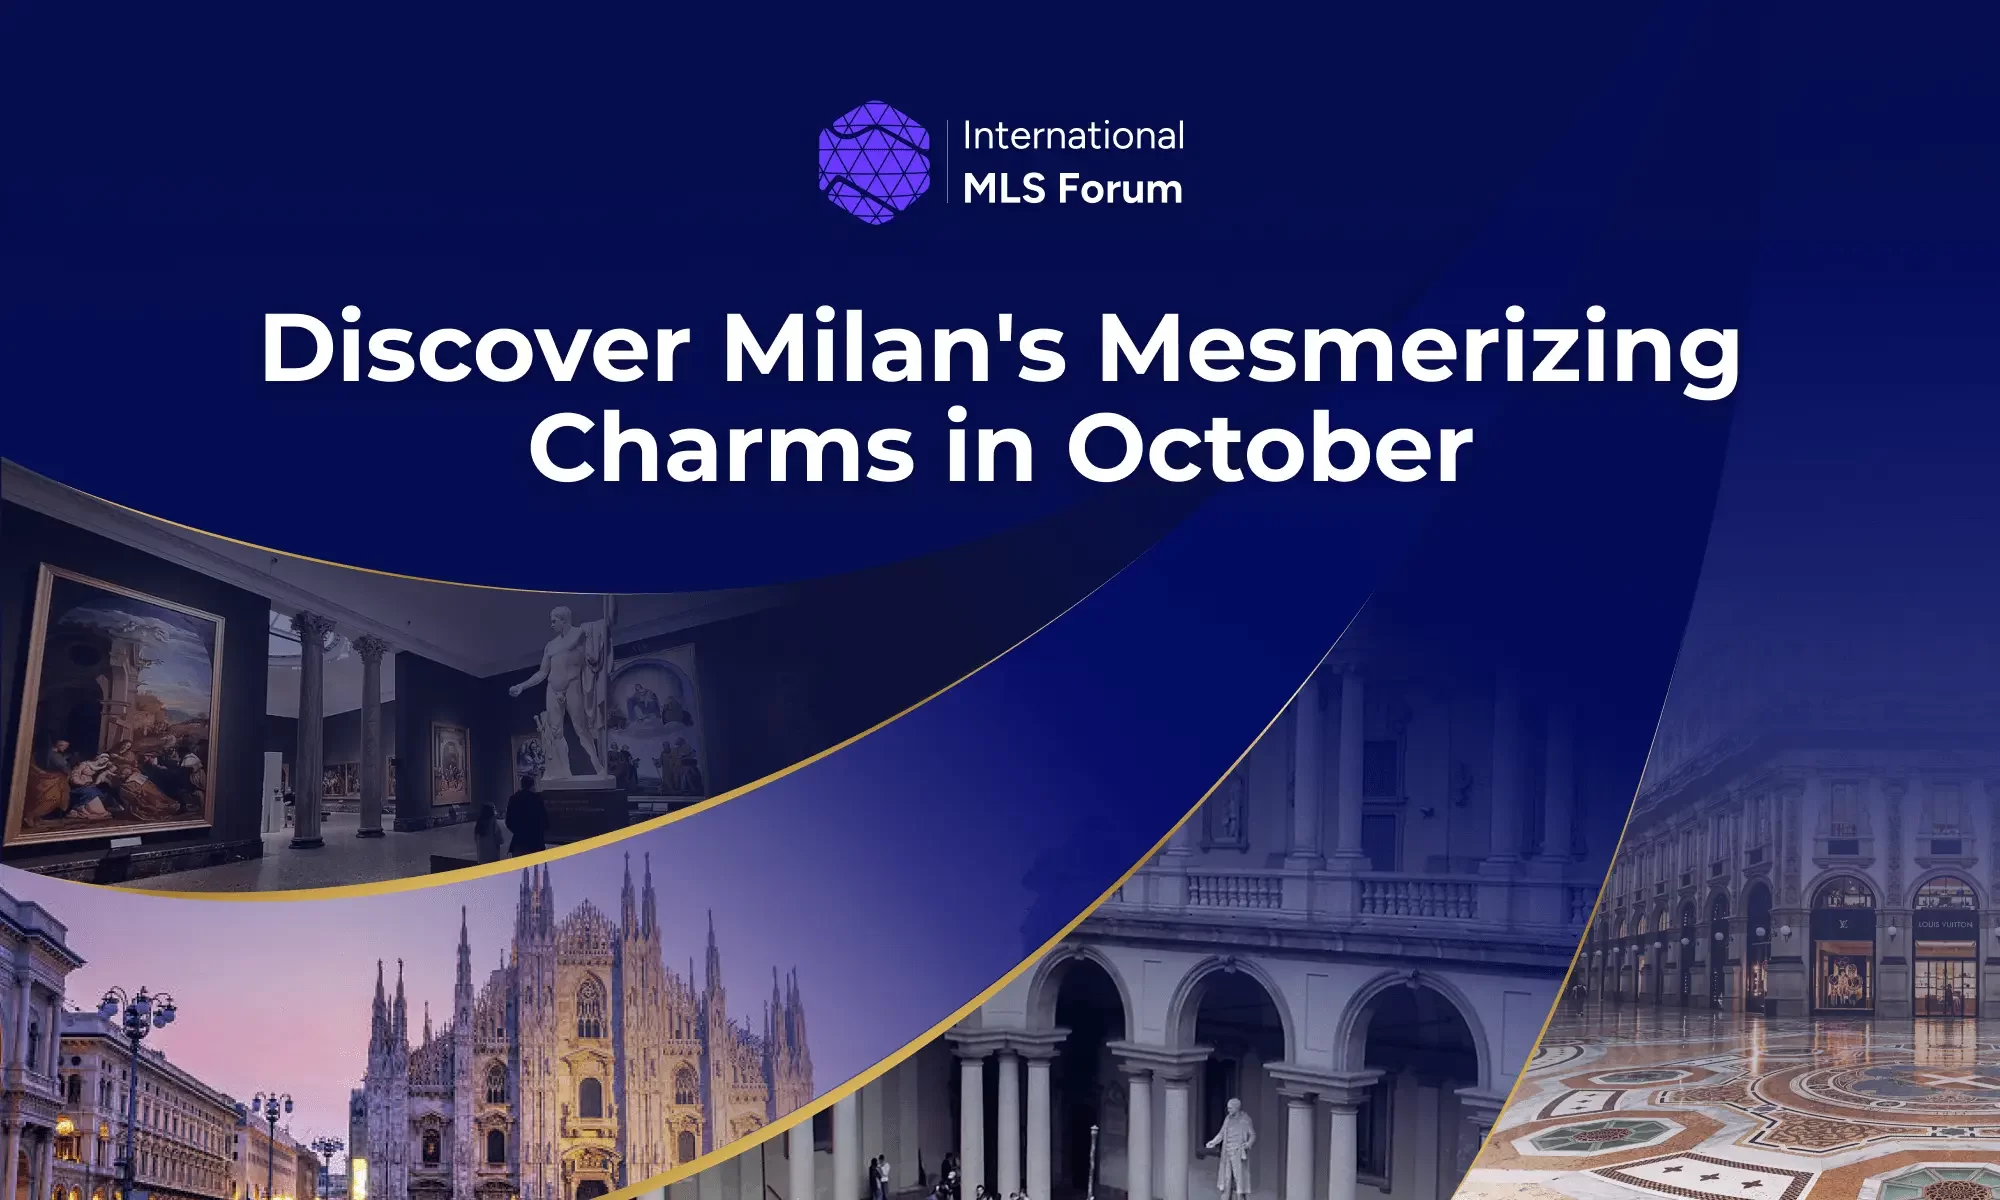 Discover Milan's Mesmerizing Charms in October